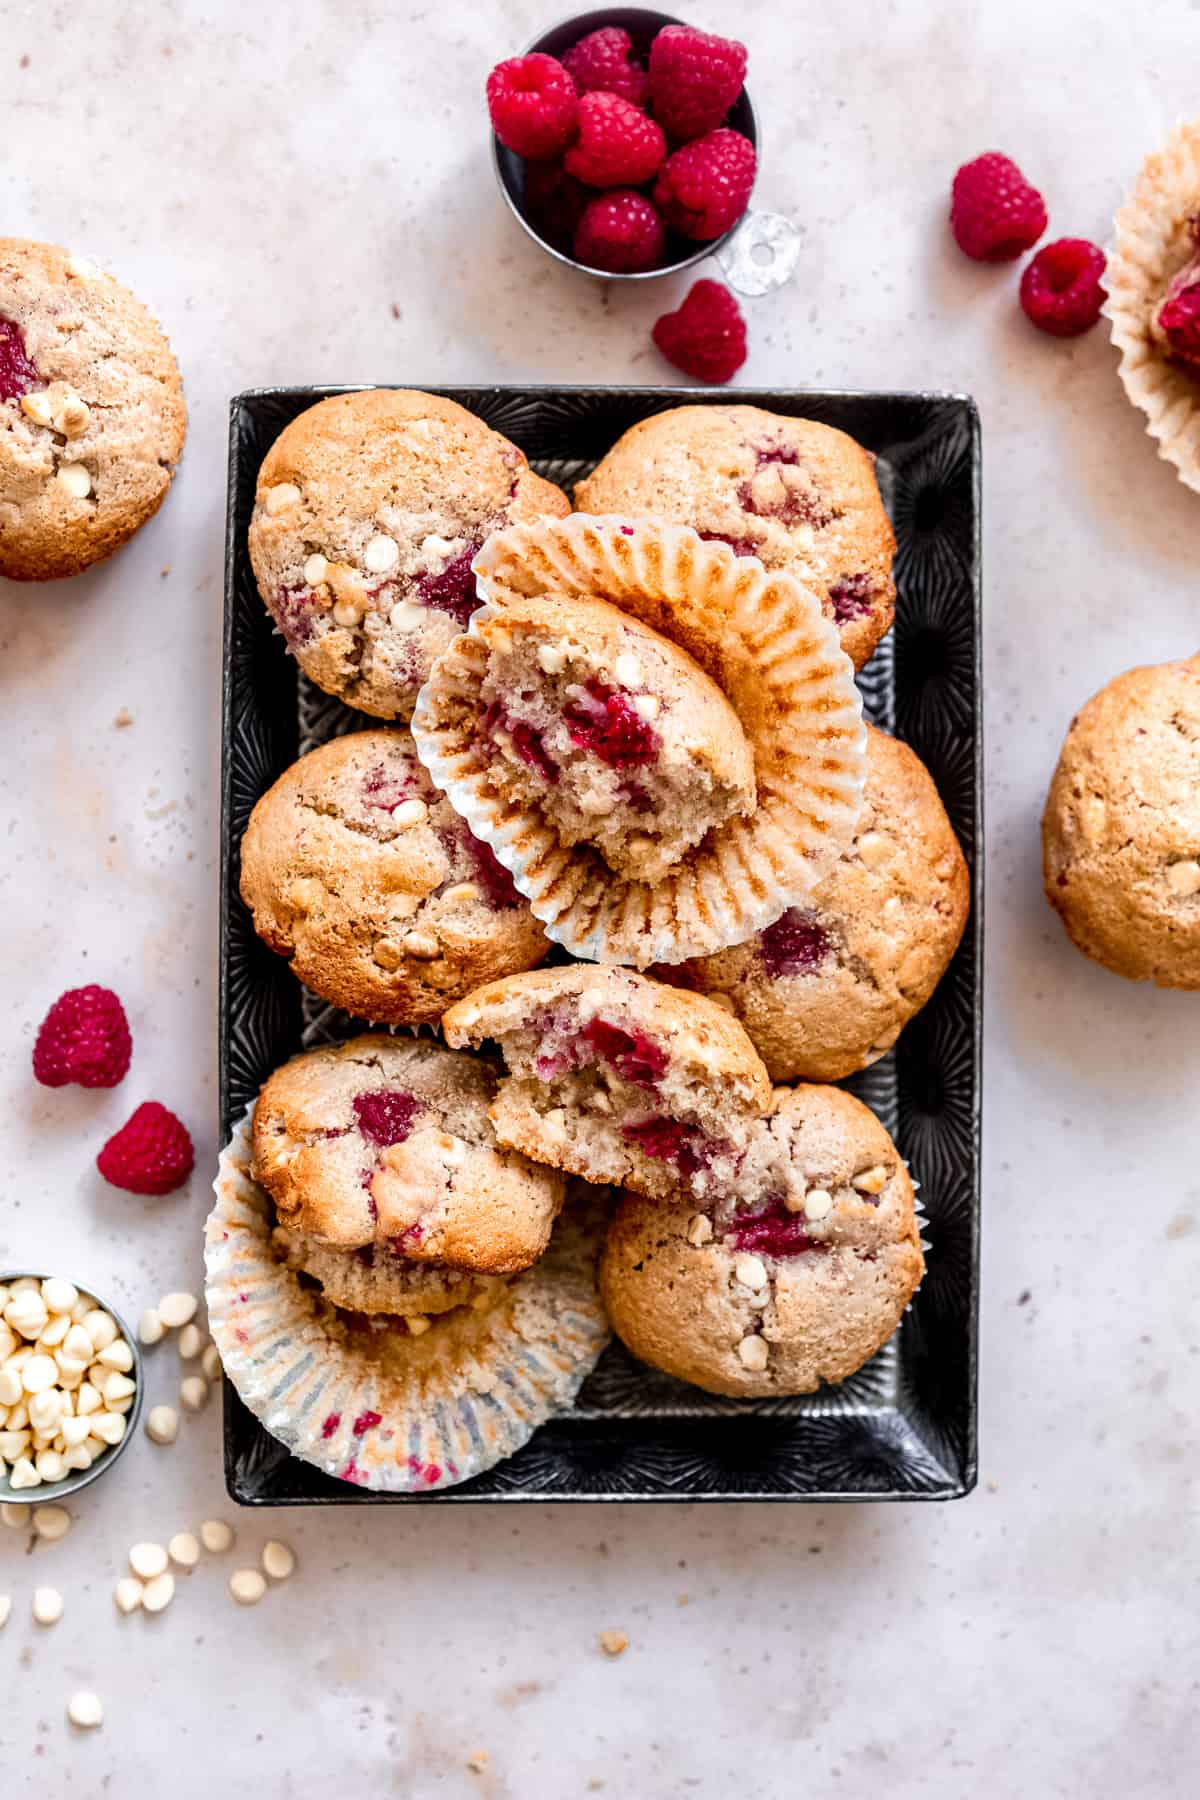 Raspberry white chocolate muffins in a baking tray.